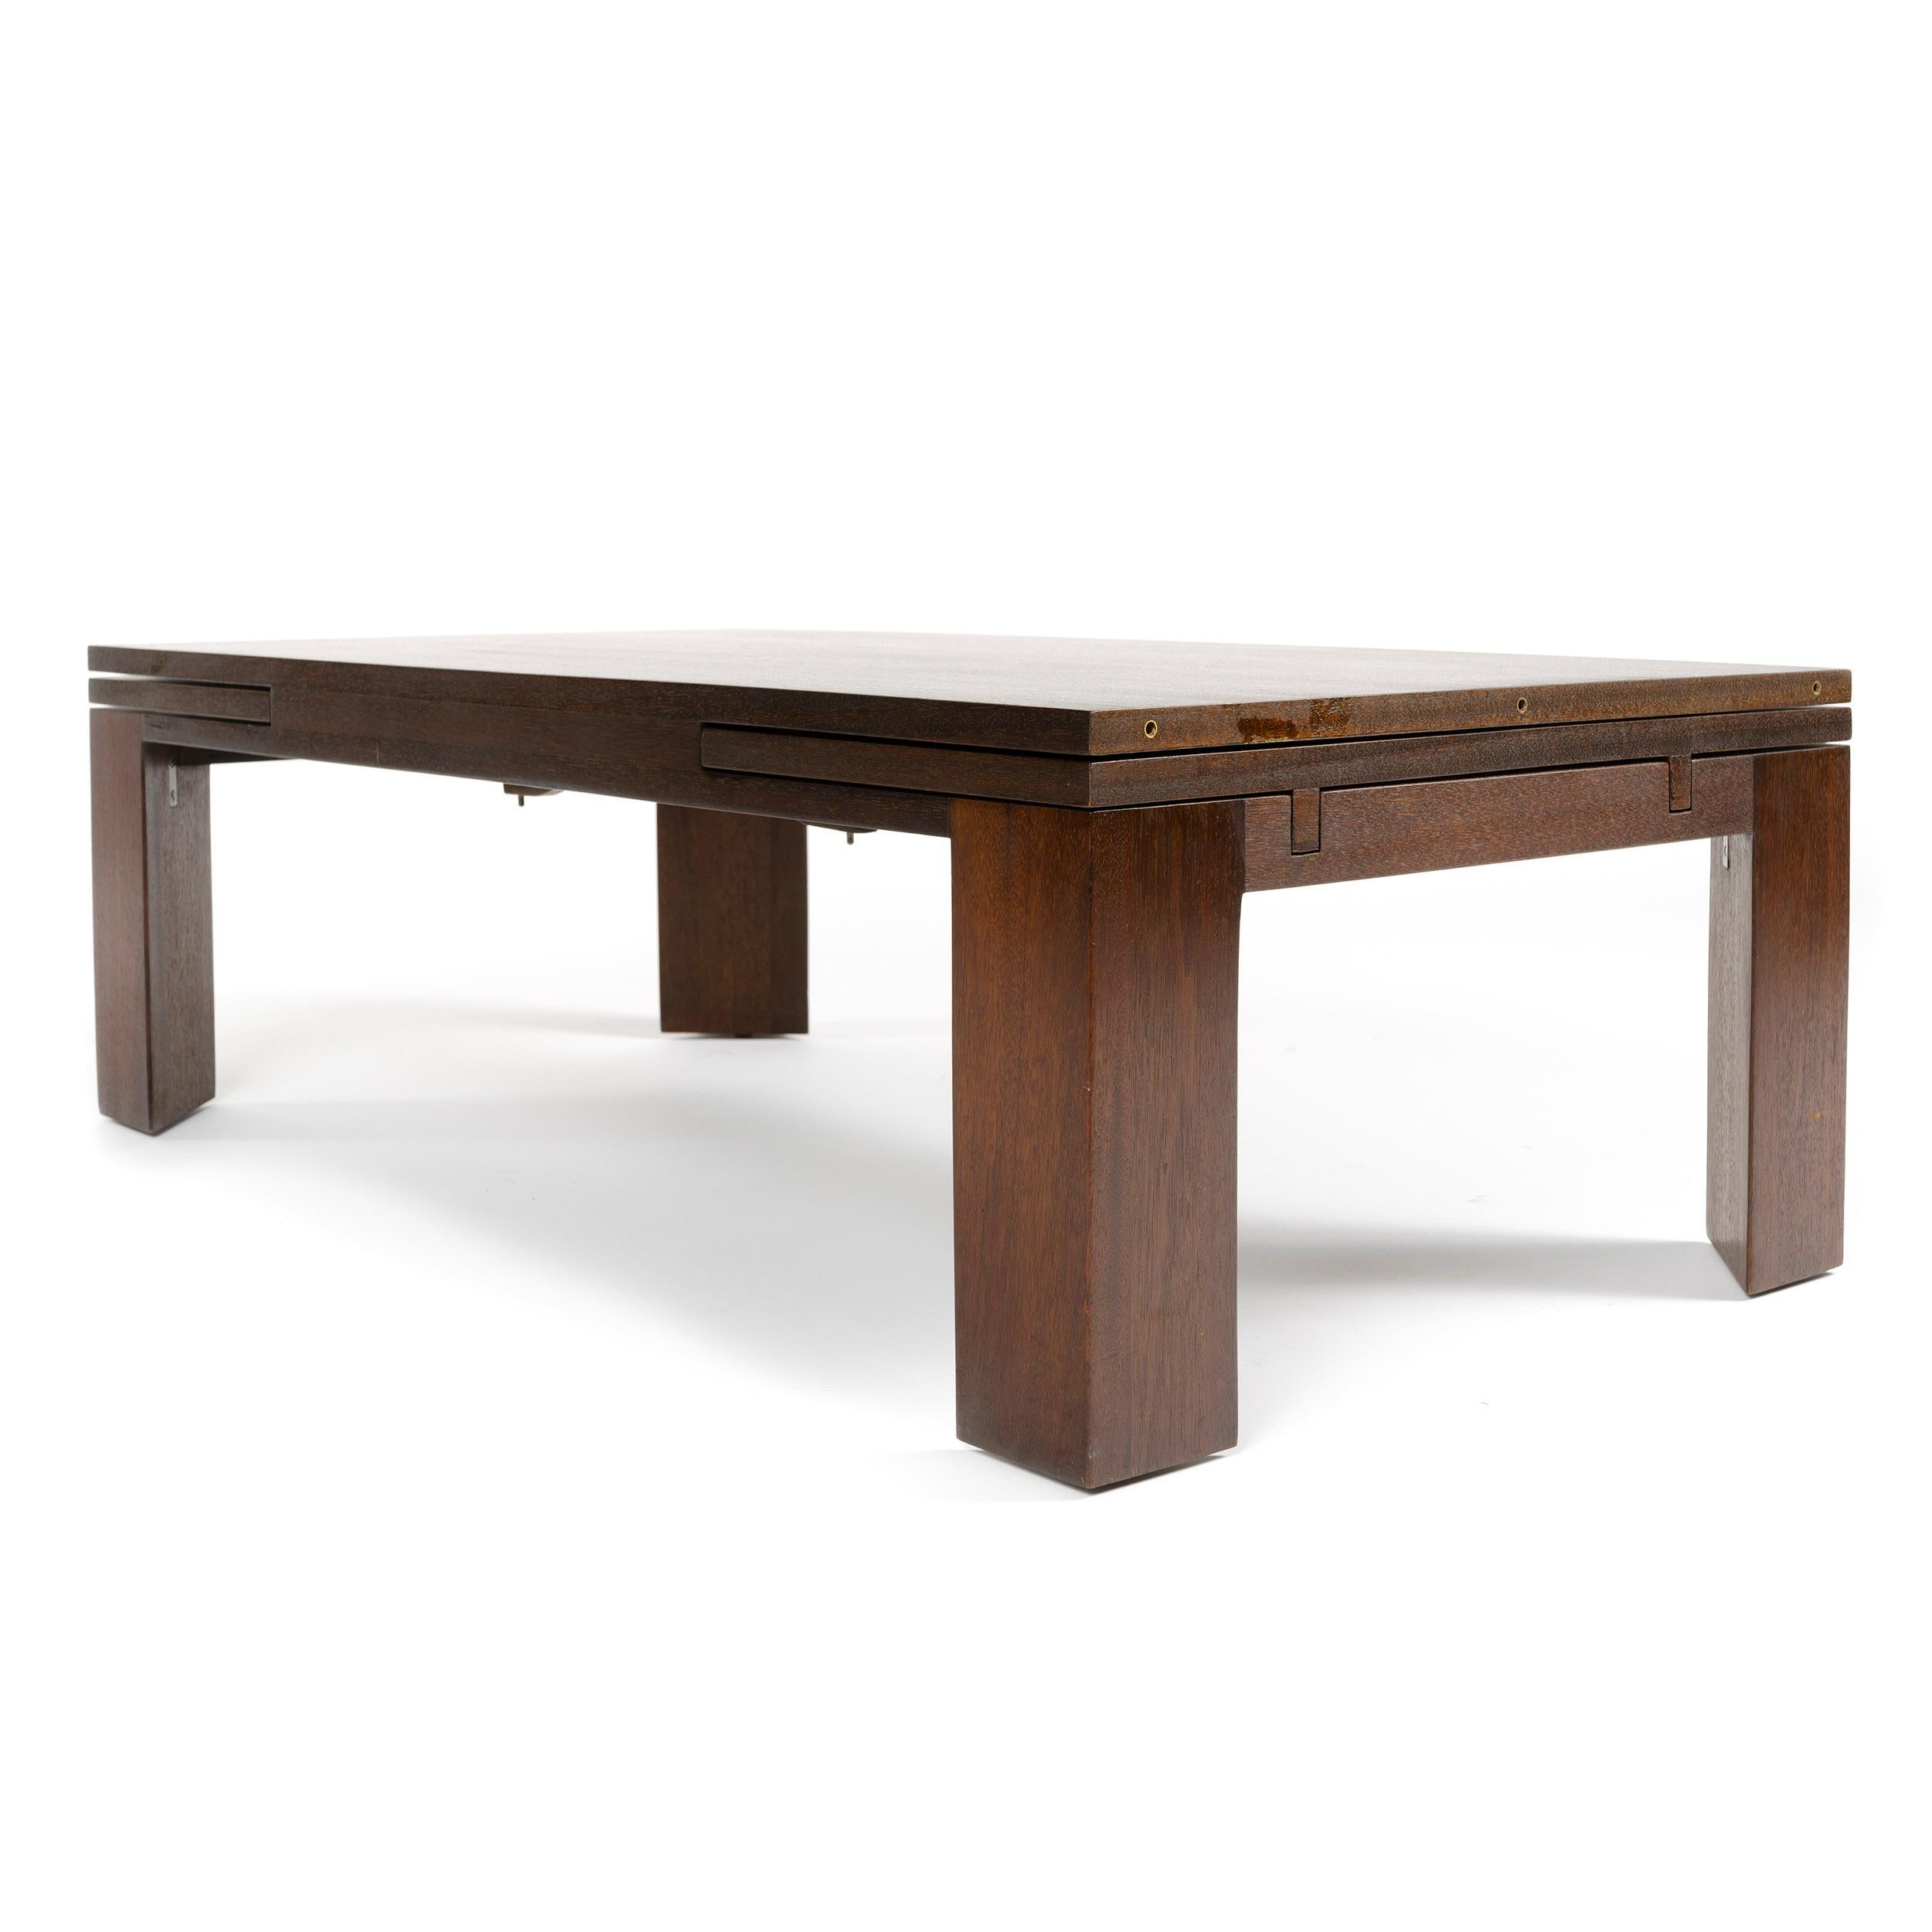 American 1940s Mahogany Low Table by Edward Wormley for Dunbar